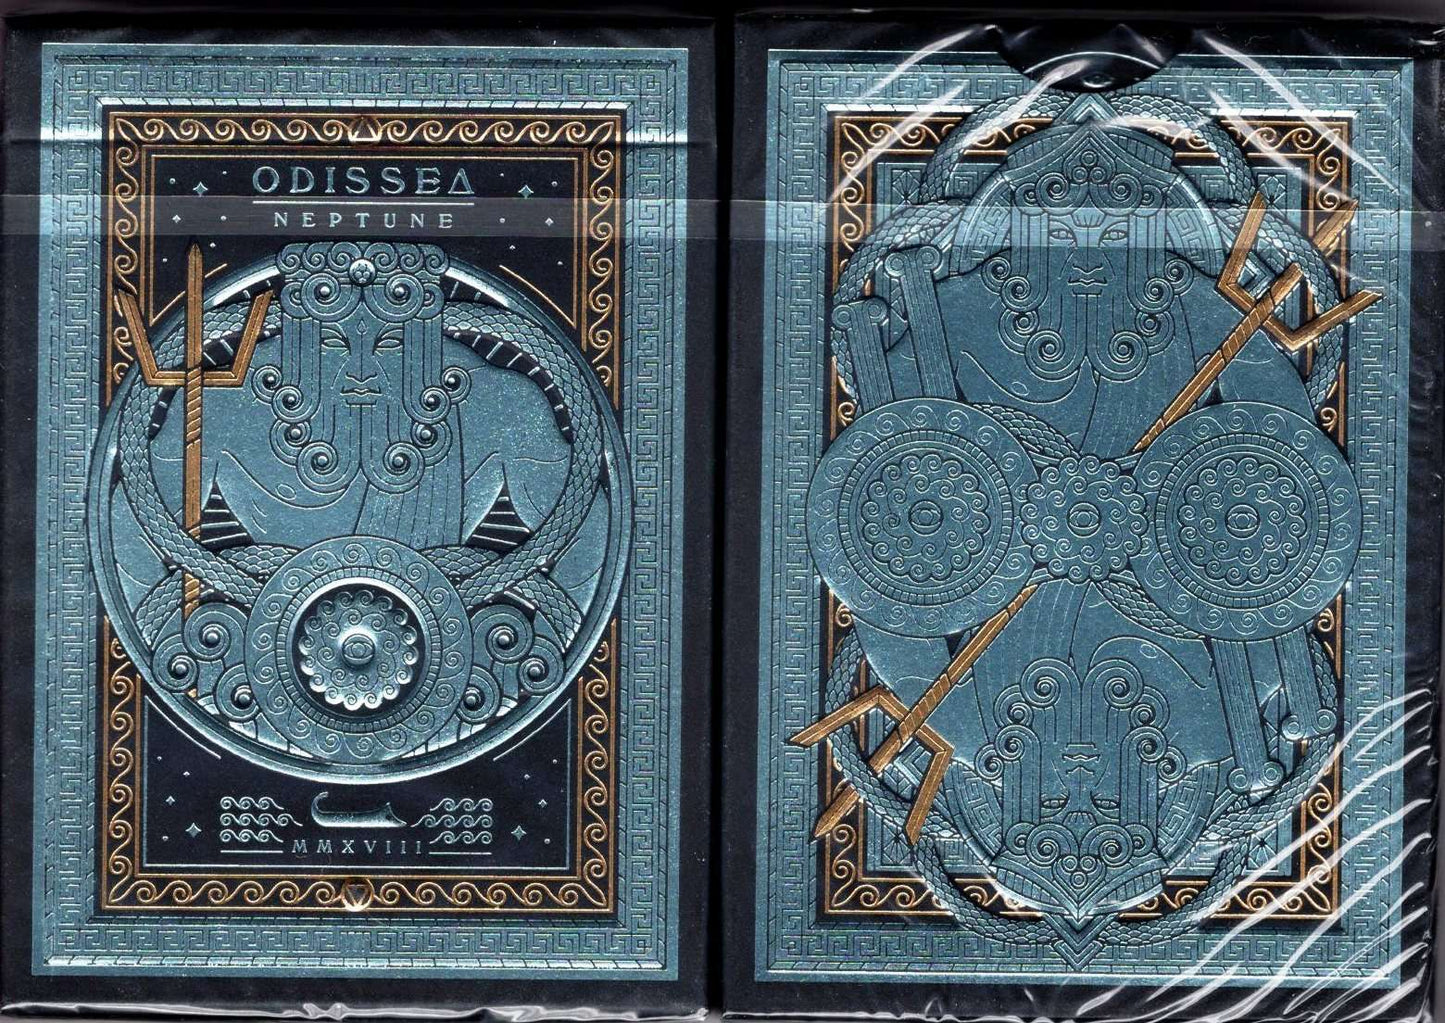 PlayingCardDecks.com-Odissea Playing Cards USPCC - 3 Editions: Neptune